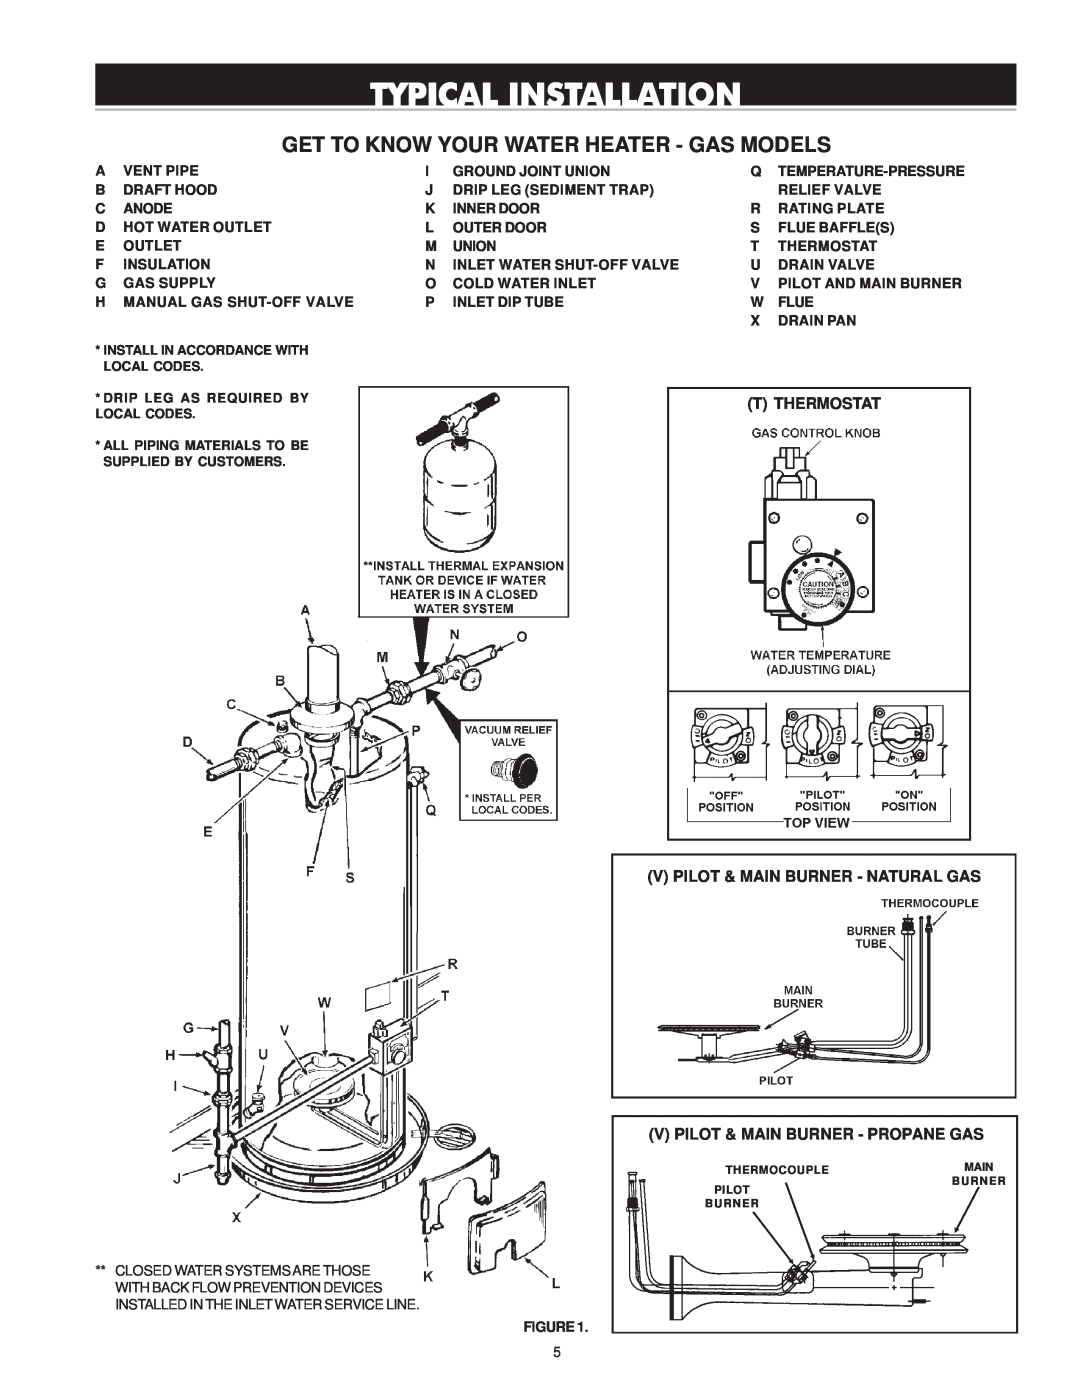 Reliance Water Heaters 606 Series Typical Installation, Get To Know Your Water Heater - Gas Models, Vent Pipe, Draft Hood 